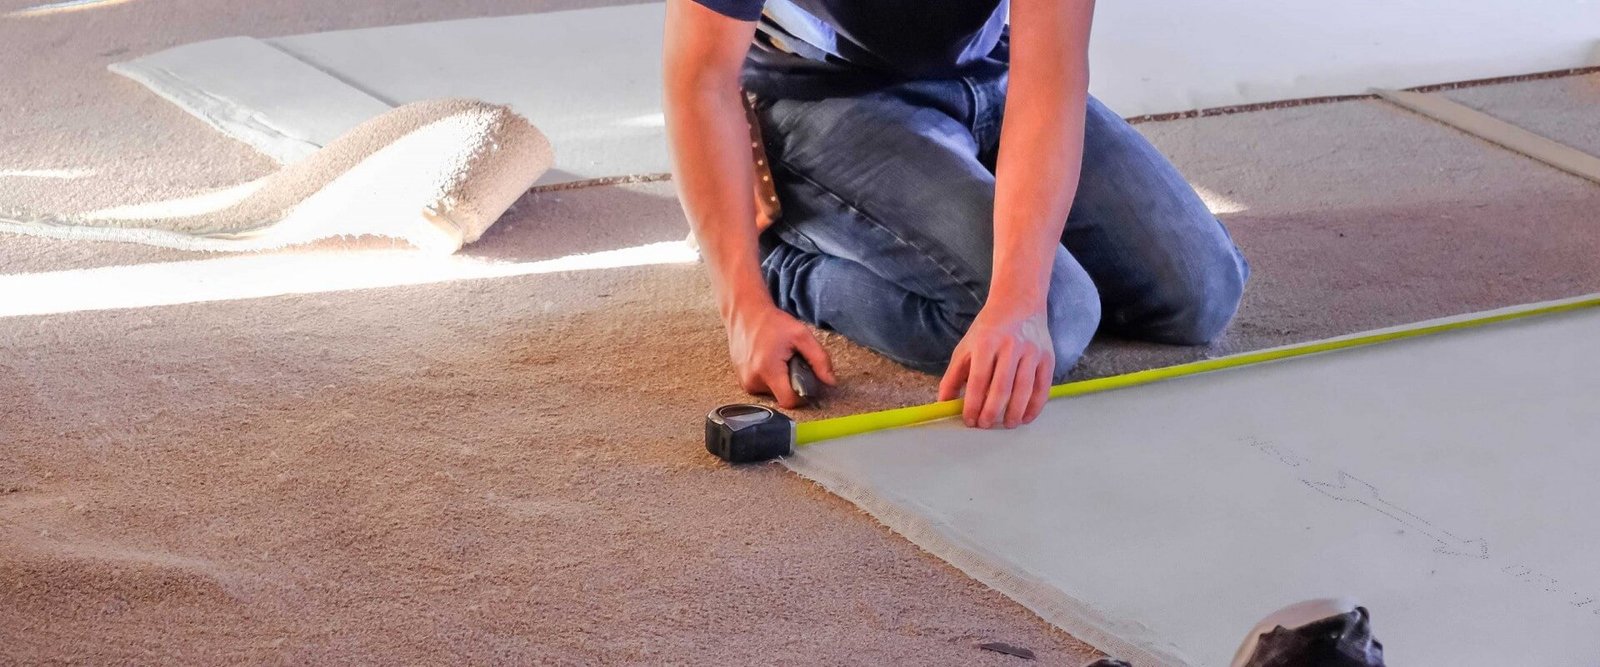 Installing Carpet In Homes And Businesses